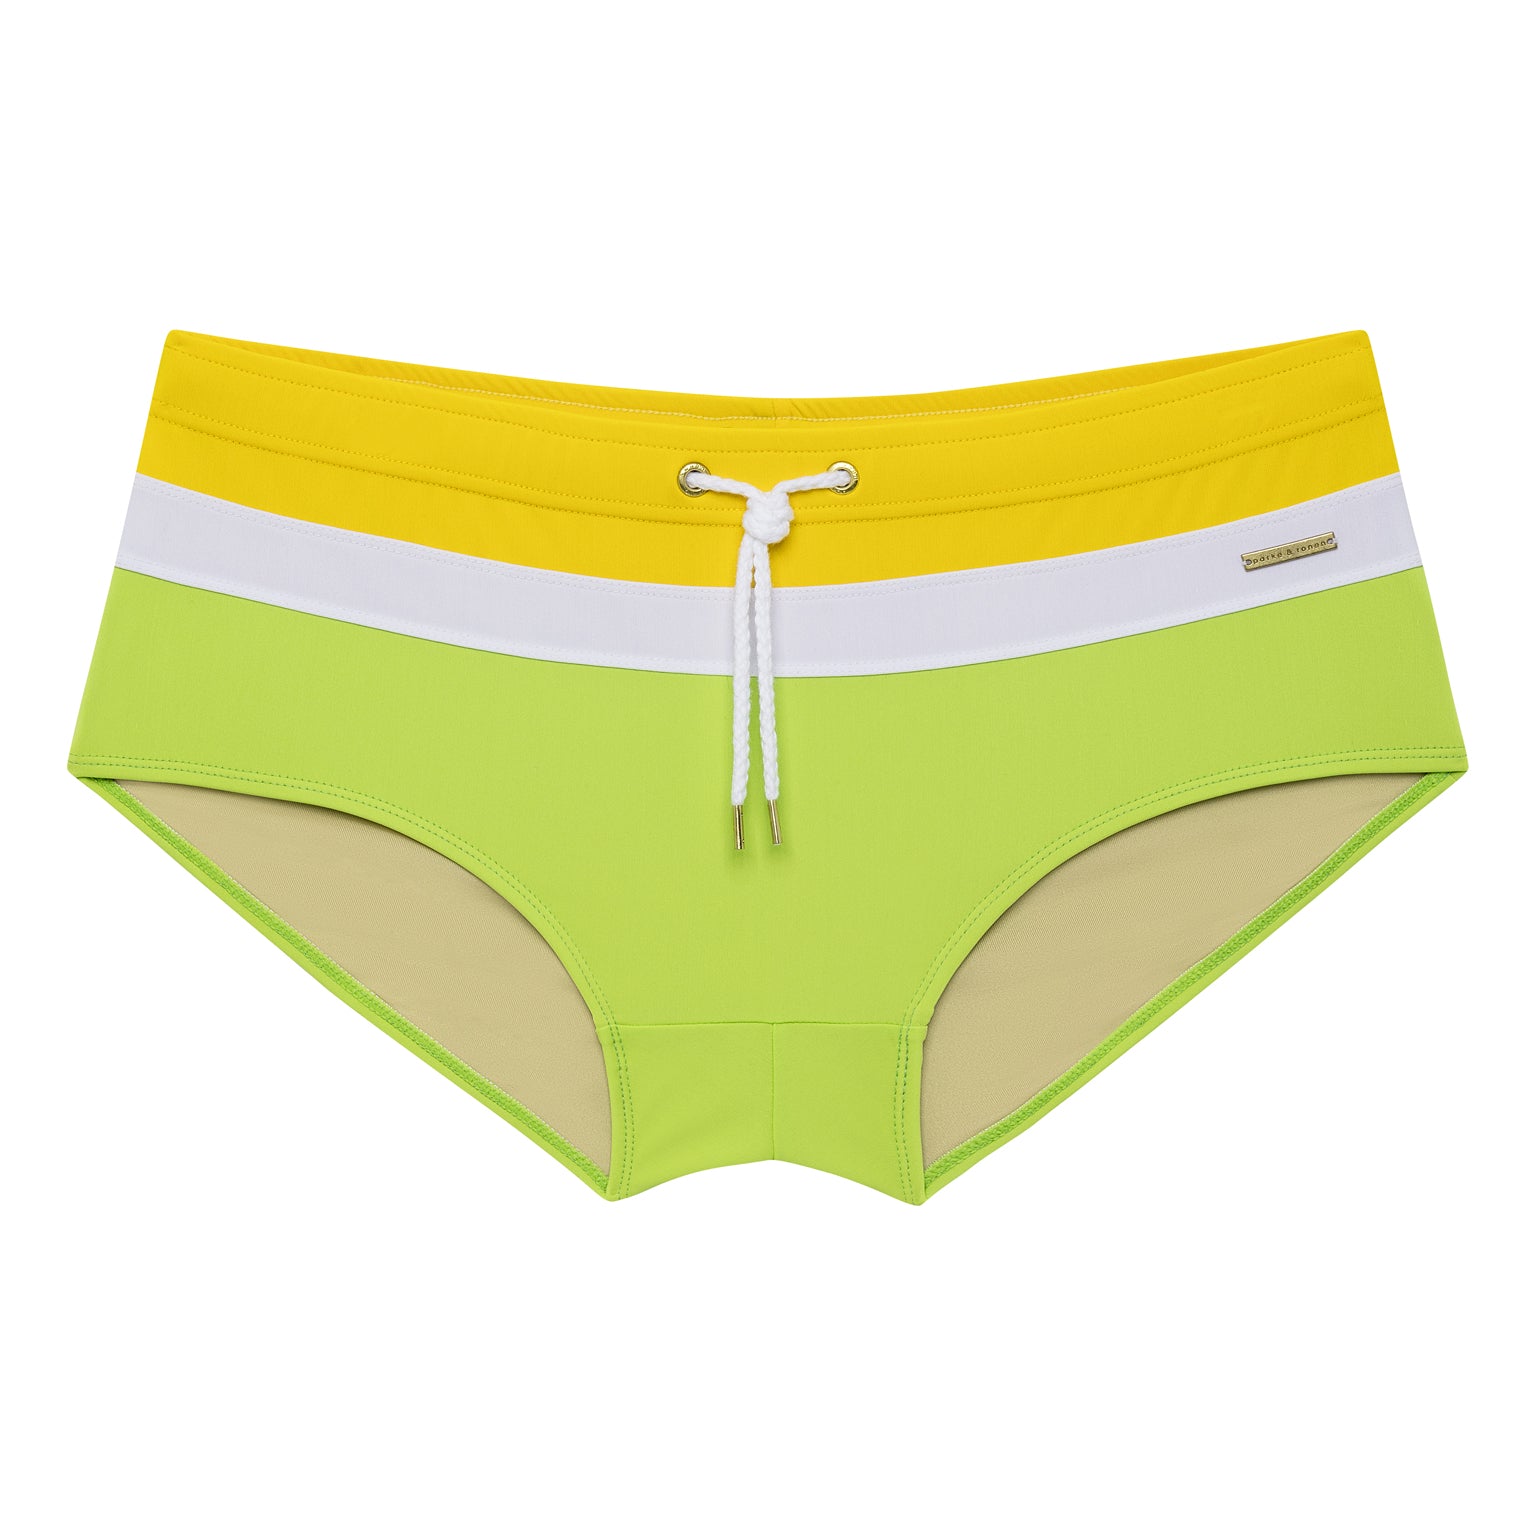 Sunflower/Lime Colorblock Corcovado Brief